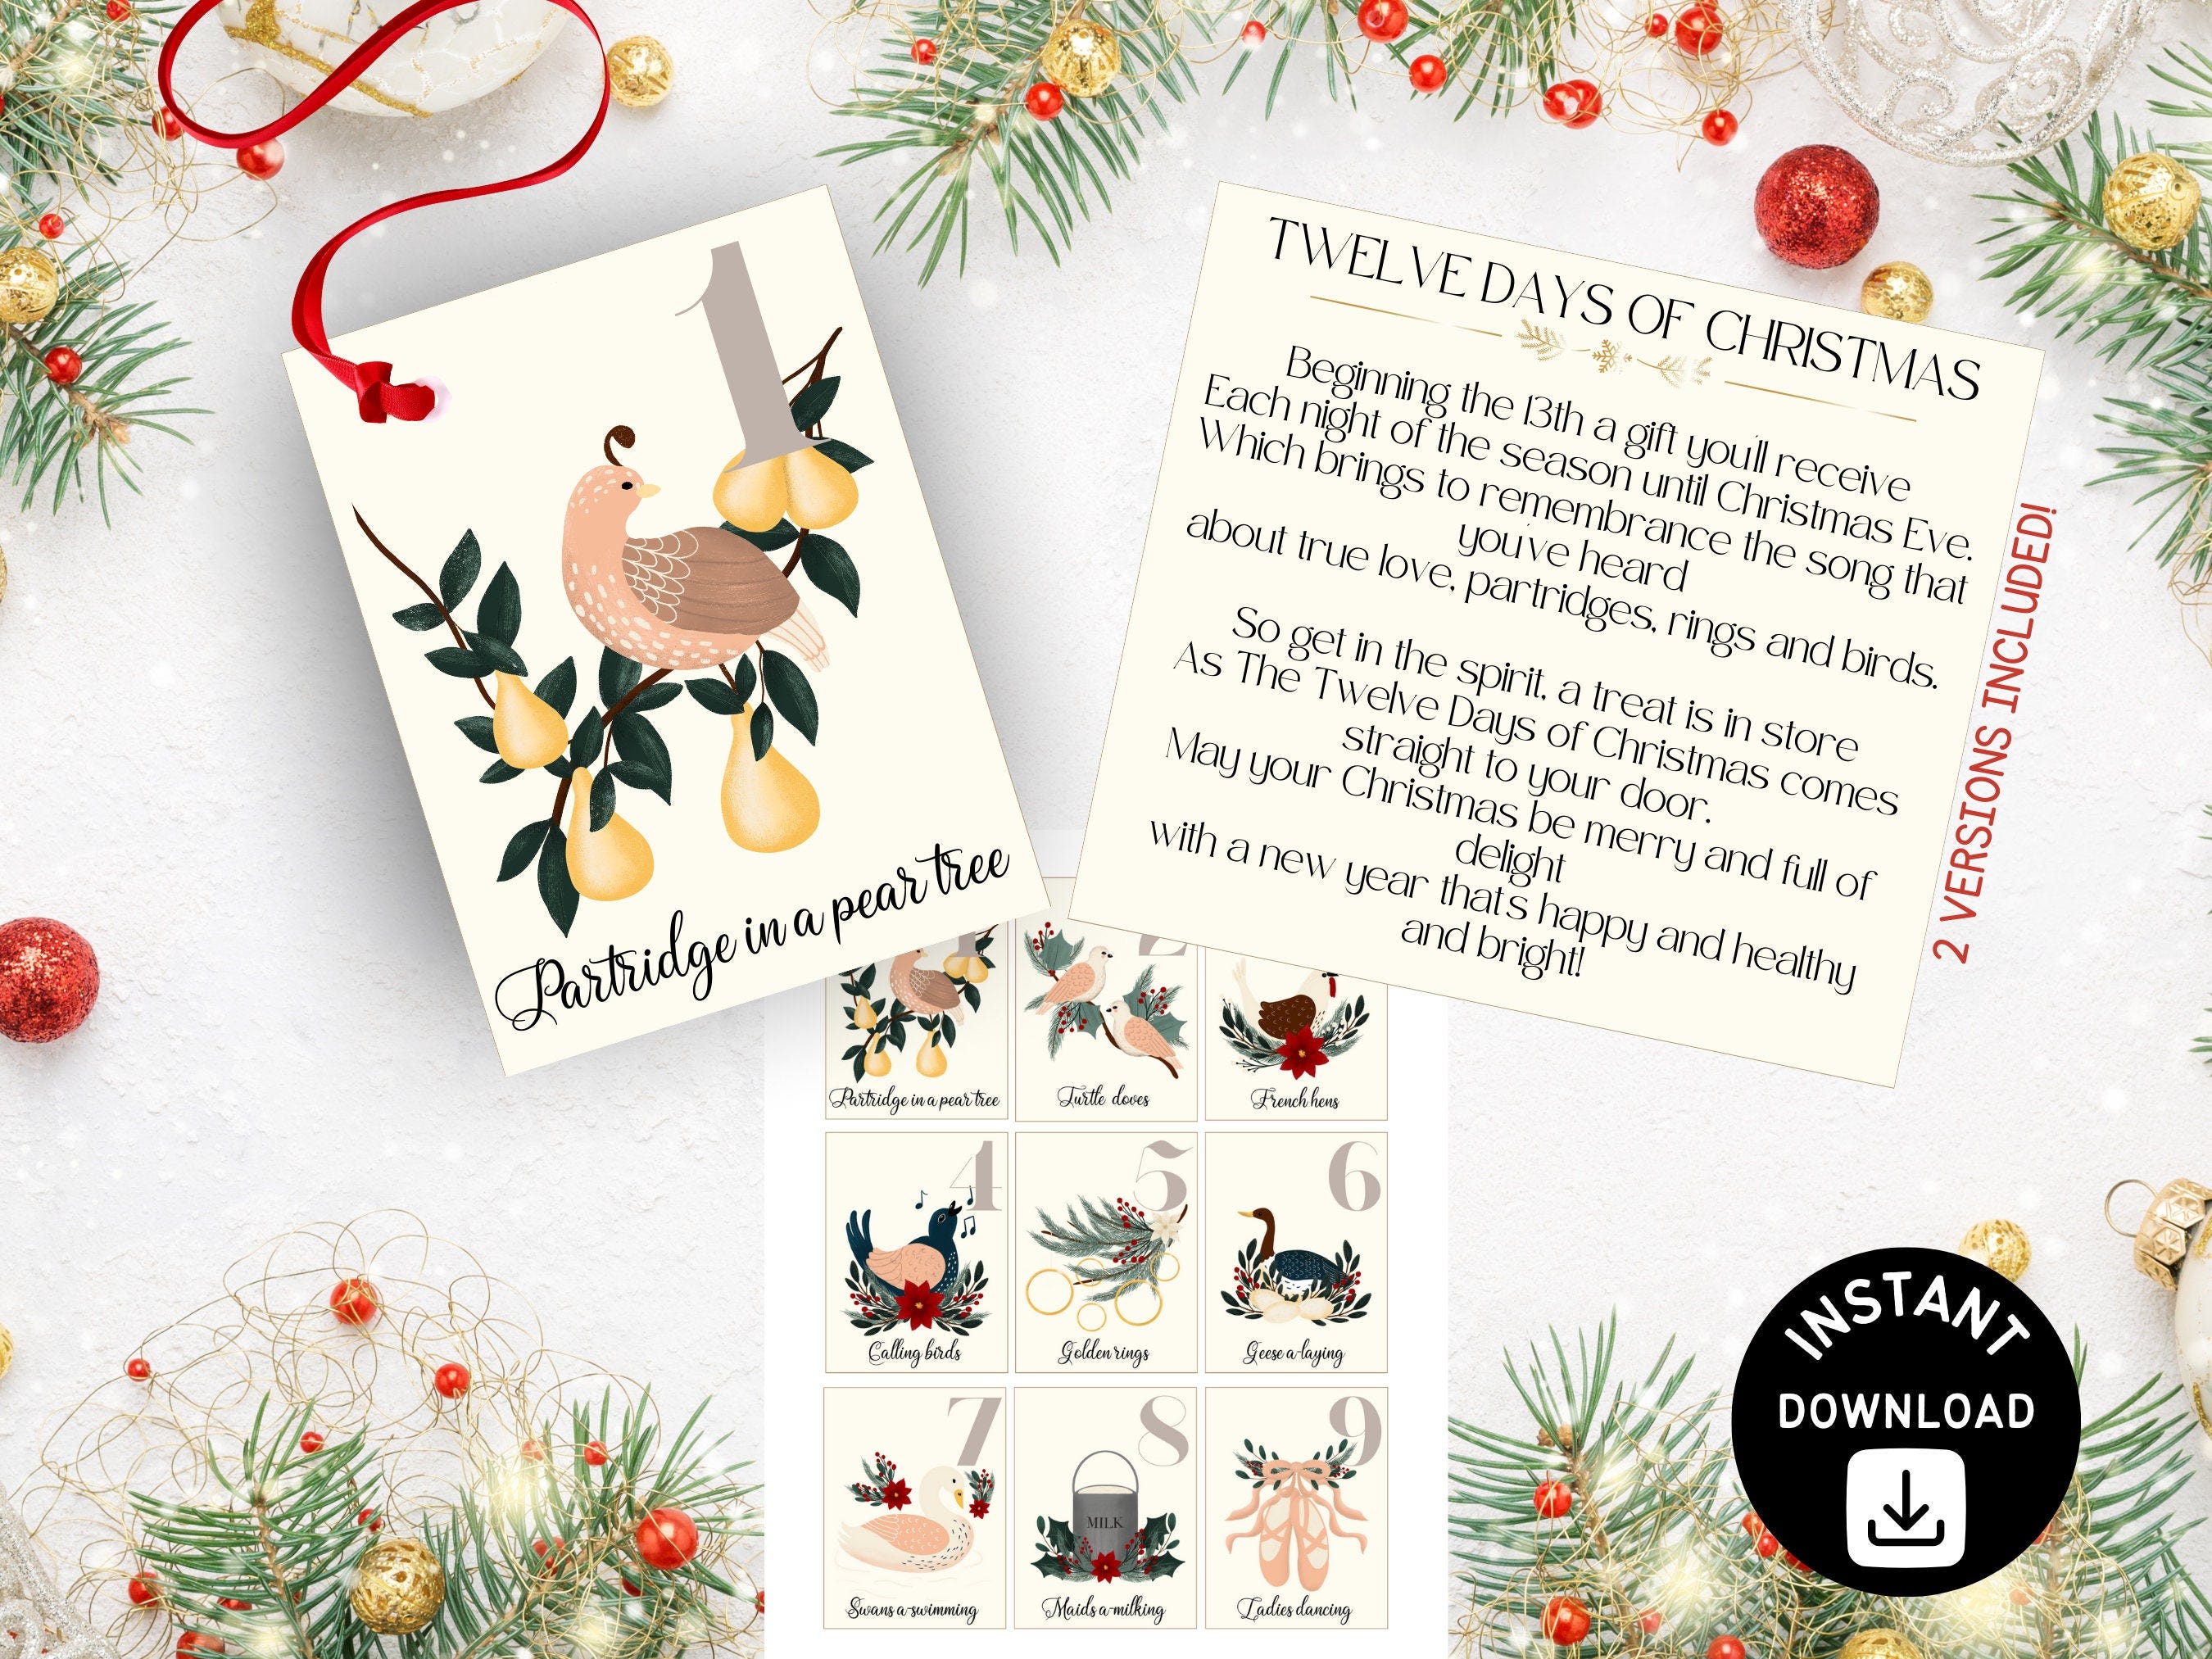 Printable Twelve Days of Christmas Gift Tags, 12 Days of Christmas Poem and Presents, Christmas Tradition Gift Tags, Instant Download